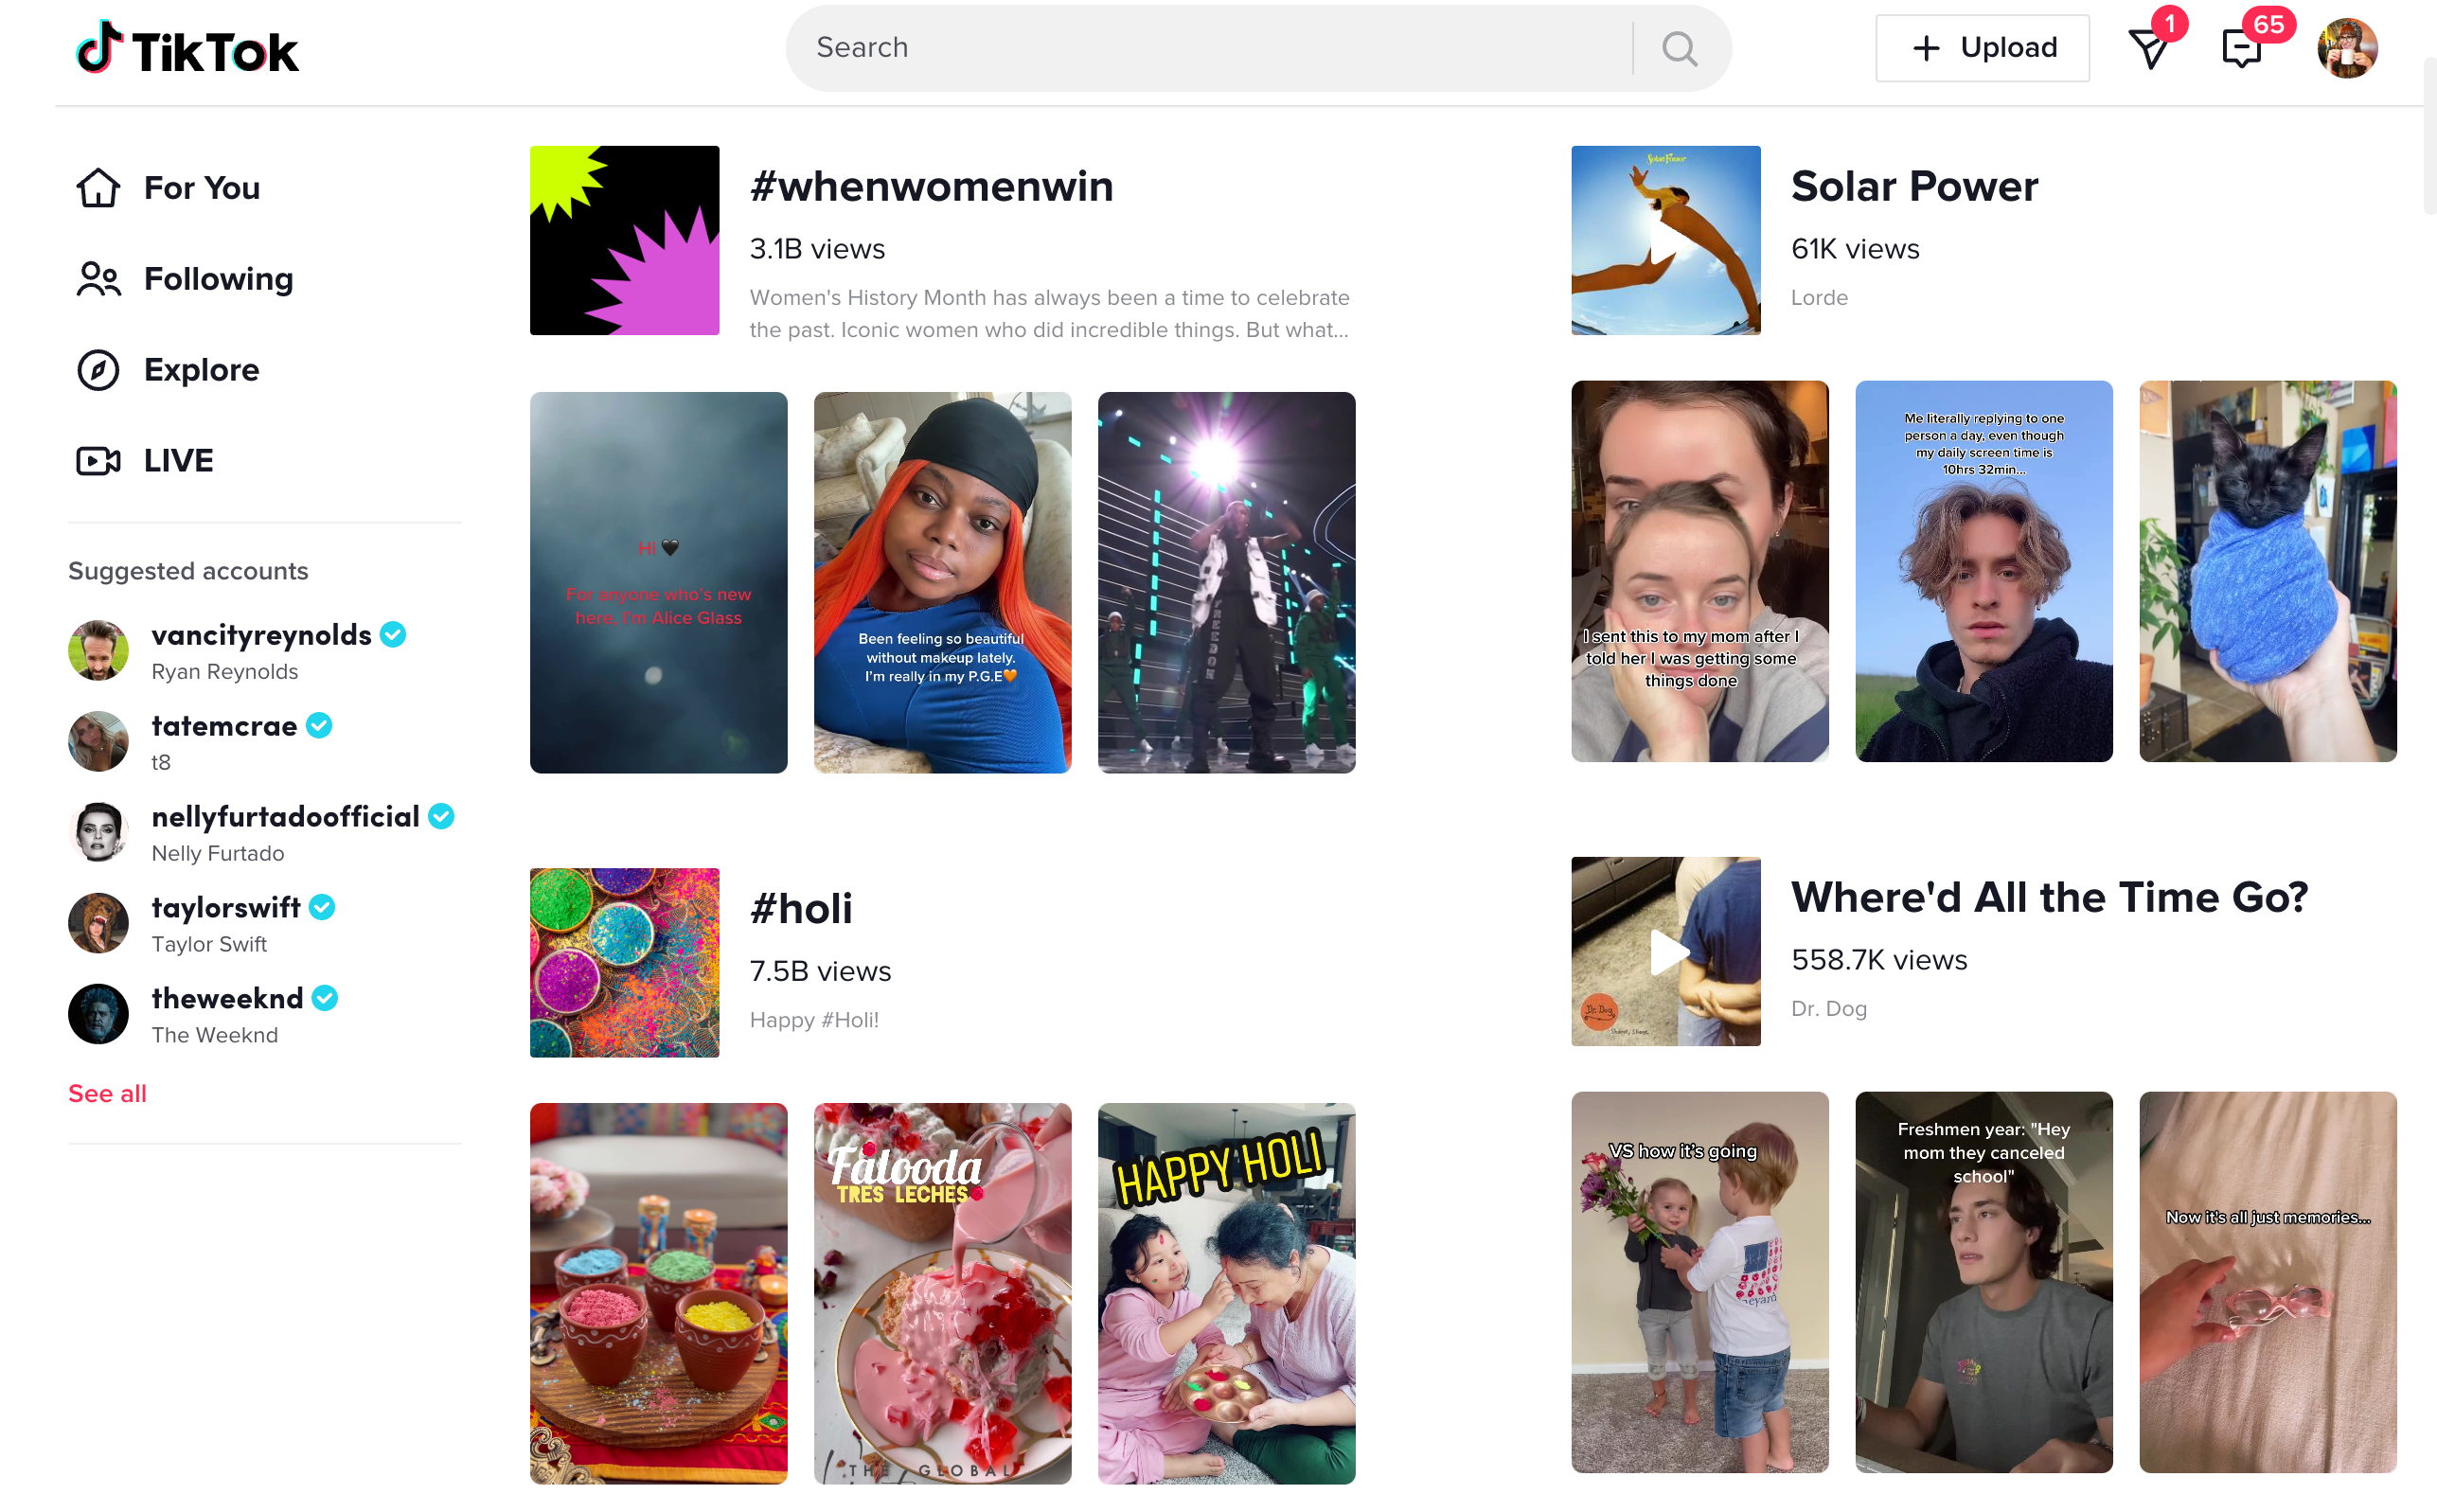 TikTok interface showing the discover page